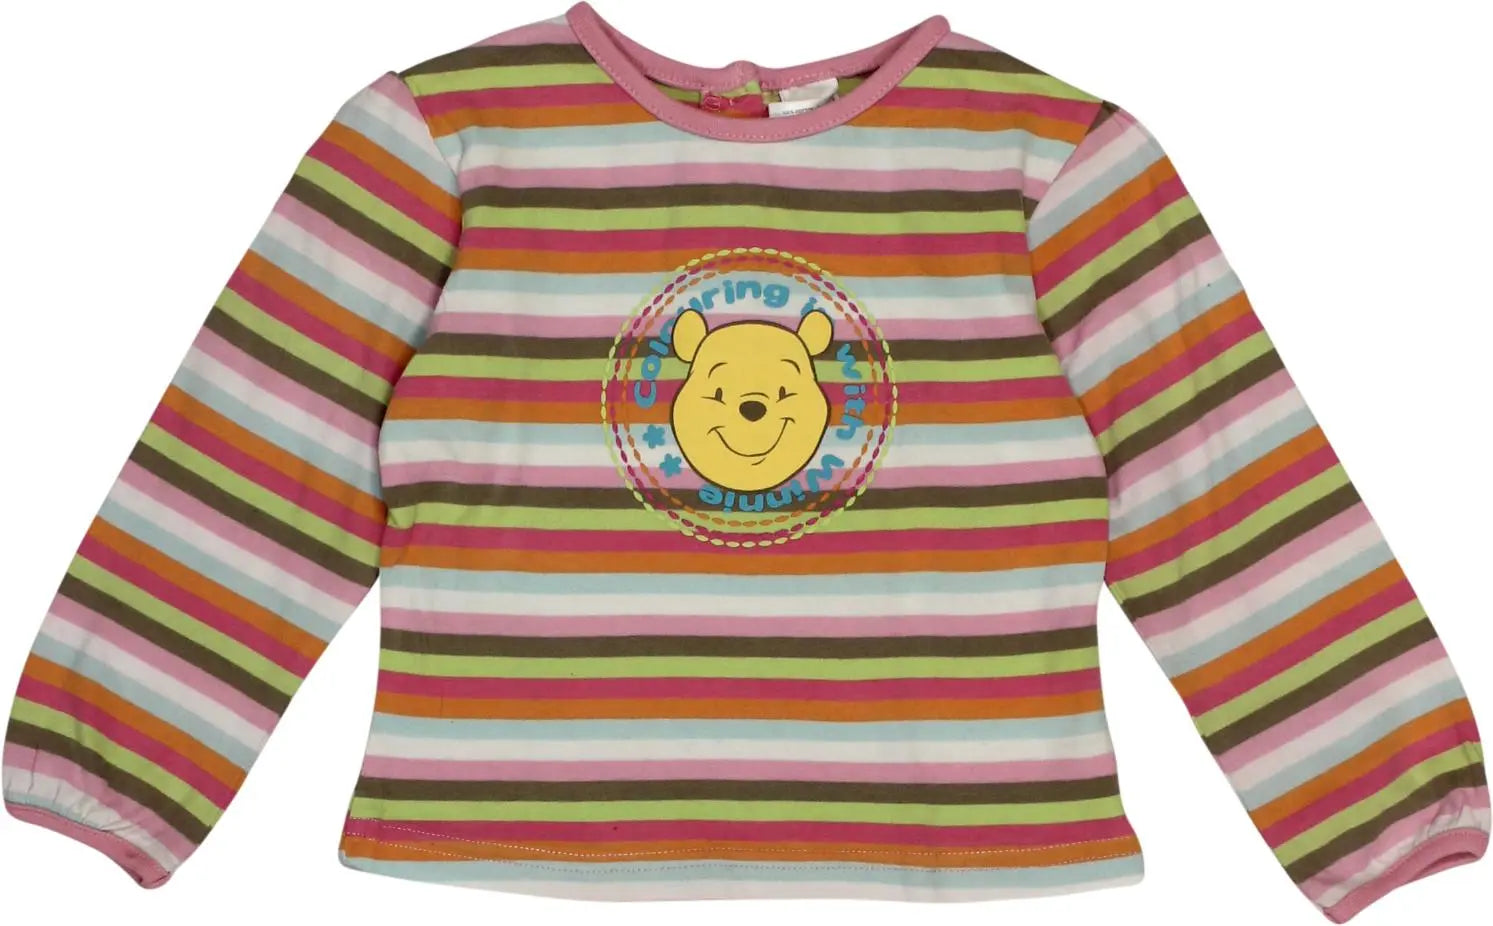 C&A - 'Winnie the Pooh' Long Sleeve- ThriftTale.com - Vintage and second handclothing